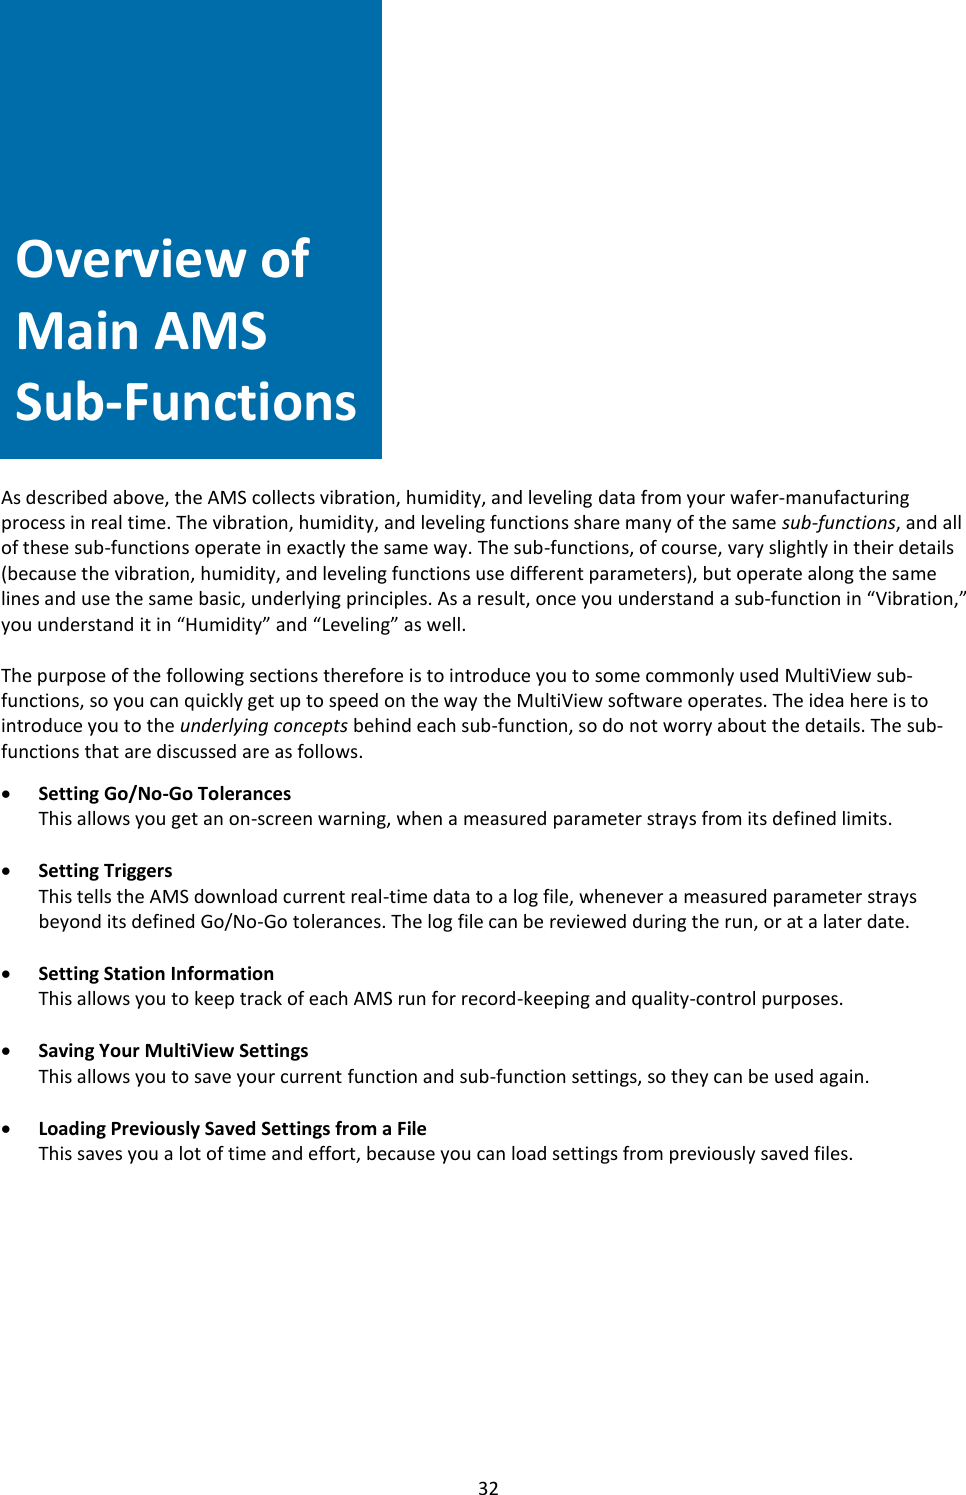   32      Overview of Main AMS Sub-Functions              As described above, the AMS collects vibration, humidity, and leveling data from your wafer-manufacturing process in real time. The vibration, humidity, and leveling functions share many of the same sub-functions, and all of these sub-functions operate in exactly the same way. The sub-functions, of course, vary slightly in their details (because the vibration, humidity, and leveling functions use different parameters), but operate along the same lines and use the same basic, underlying principles. As a result, once you understand a sub-function in “Vibration,” you understand it in “Humidity” and “Leveling” as well.  The purpose of the following sections therefore is to introduce you to some commonly used MultiView sub-functions, so you can quickly get up to speed on the way the MultiView software operates. The idea here is to introduce you to the underlying concepts behind each sub-function, so do not worry about the details. The sub-functions that are discussed are as follows.  • Setting Go/No-Go Tolerances This allows you get an on-screen warning, when a measured parameter strays from its defined limits.  • Setting Triggers This tells the AMS download current real-time data to a log file, whenever a measured parameter strays beyond its defined Go/No-Go tolerances. The log file can be reviewed during the run, or at a later date.  • Setting Station Information This allows you to keep track of each AMS run for record-keeping and quality-control purposes.  • Saving Your MultiView Settings This allows you to save your current function and sub-function settings, so they can be used again.  • Loading Previously Saved Settings from a File This saves you a lot of time and effort, because you can load settings from previously saved files.            Overview of Main AMS Sub-Functions 